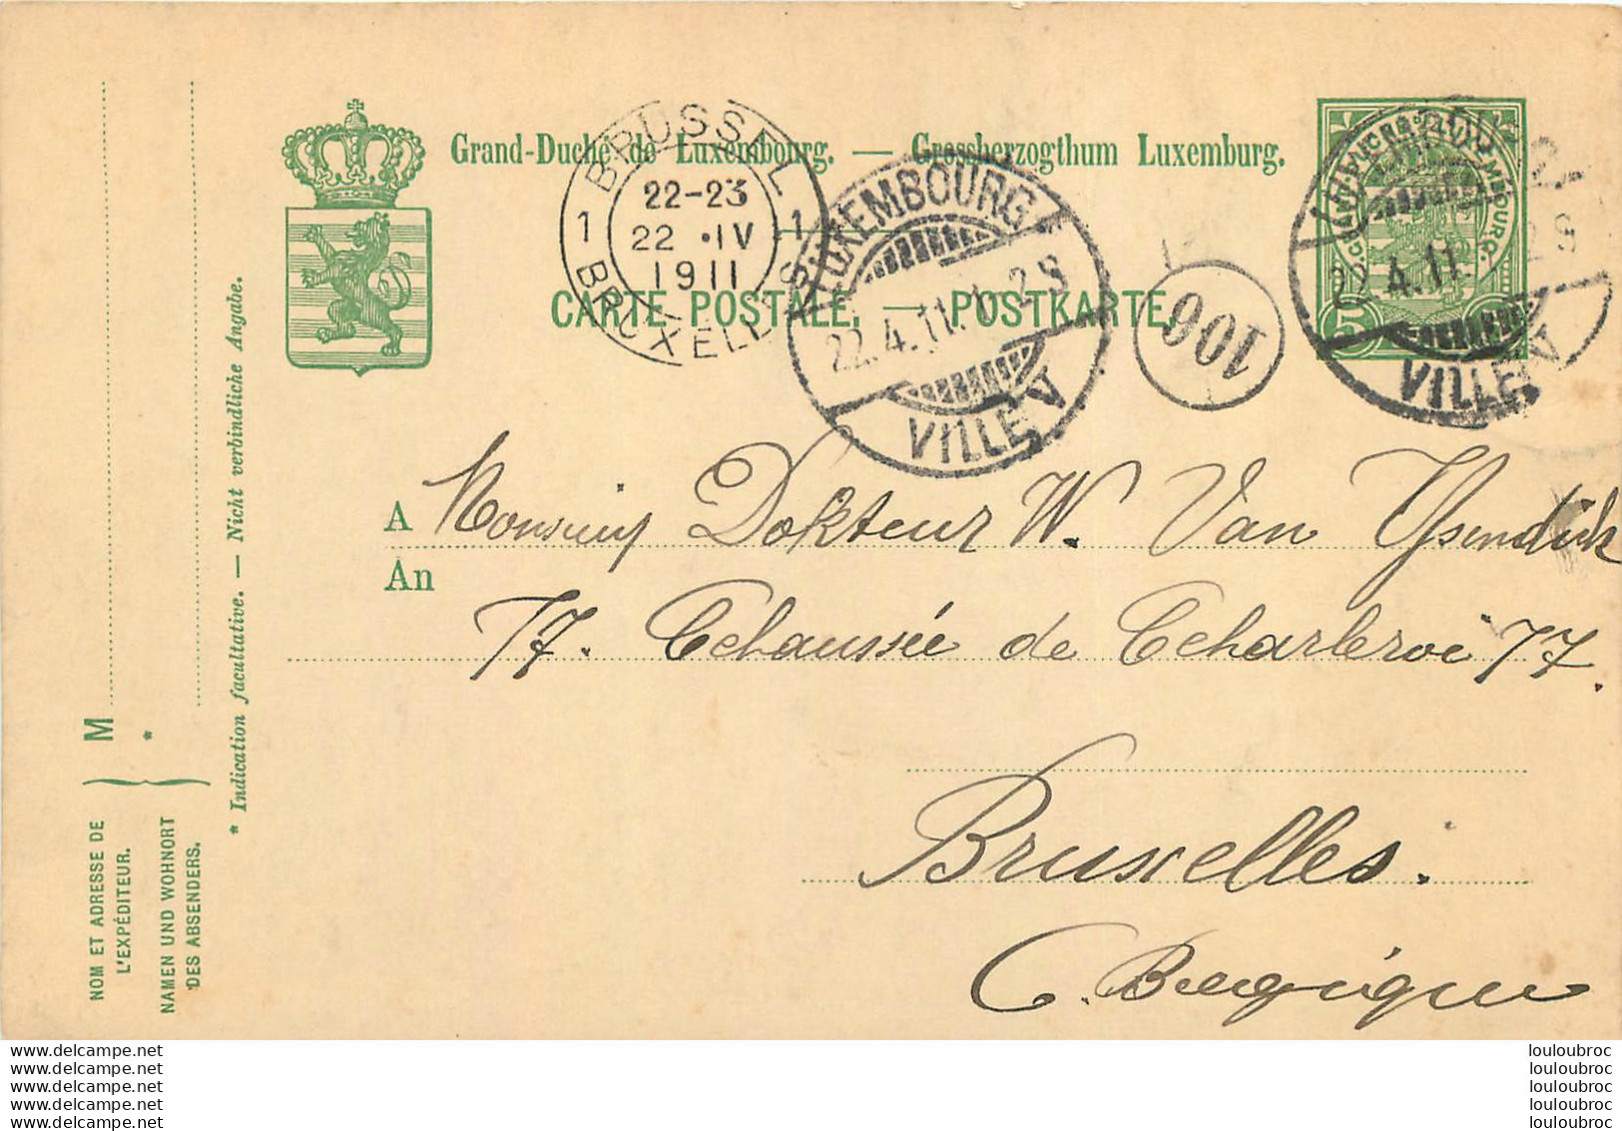 LUXEMBOURG ENTIER POSTAL 1911 - Entiers Postaux